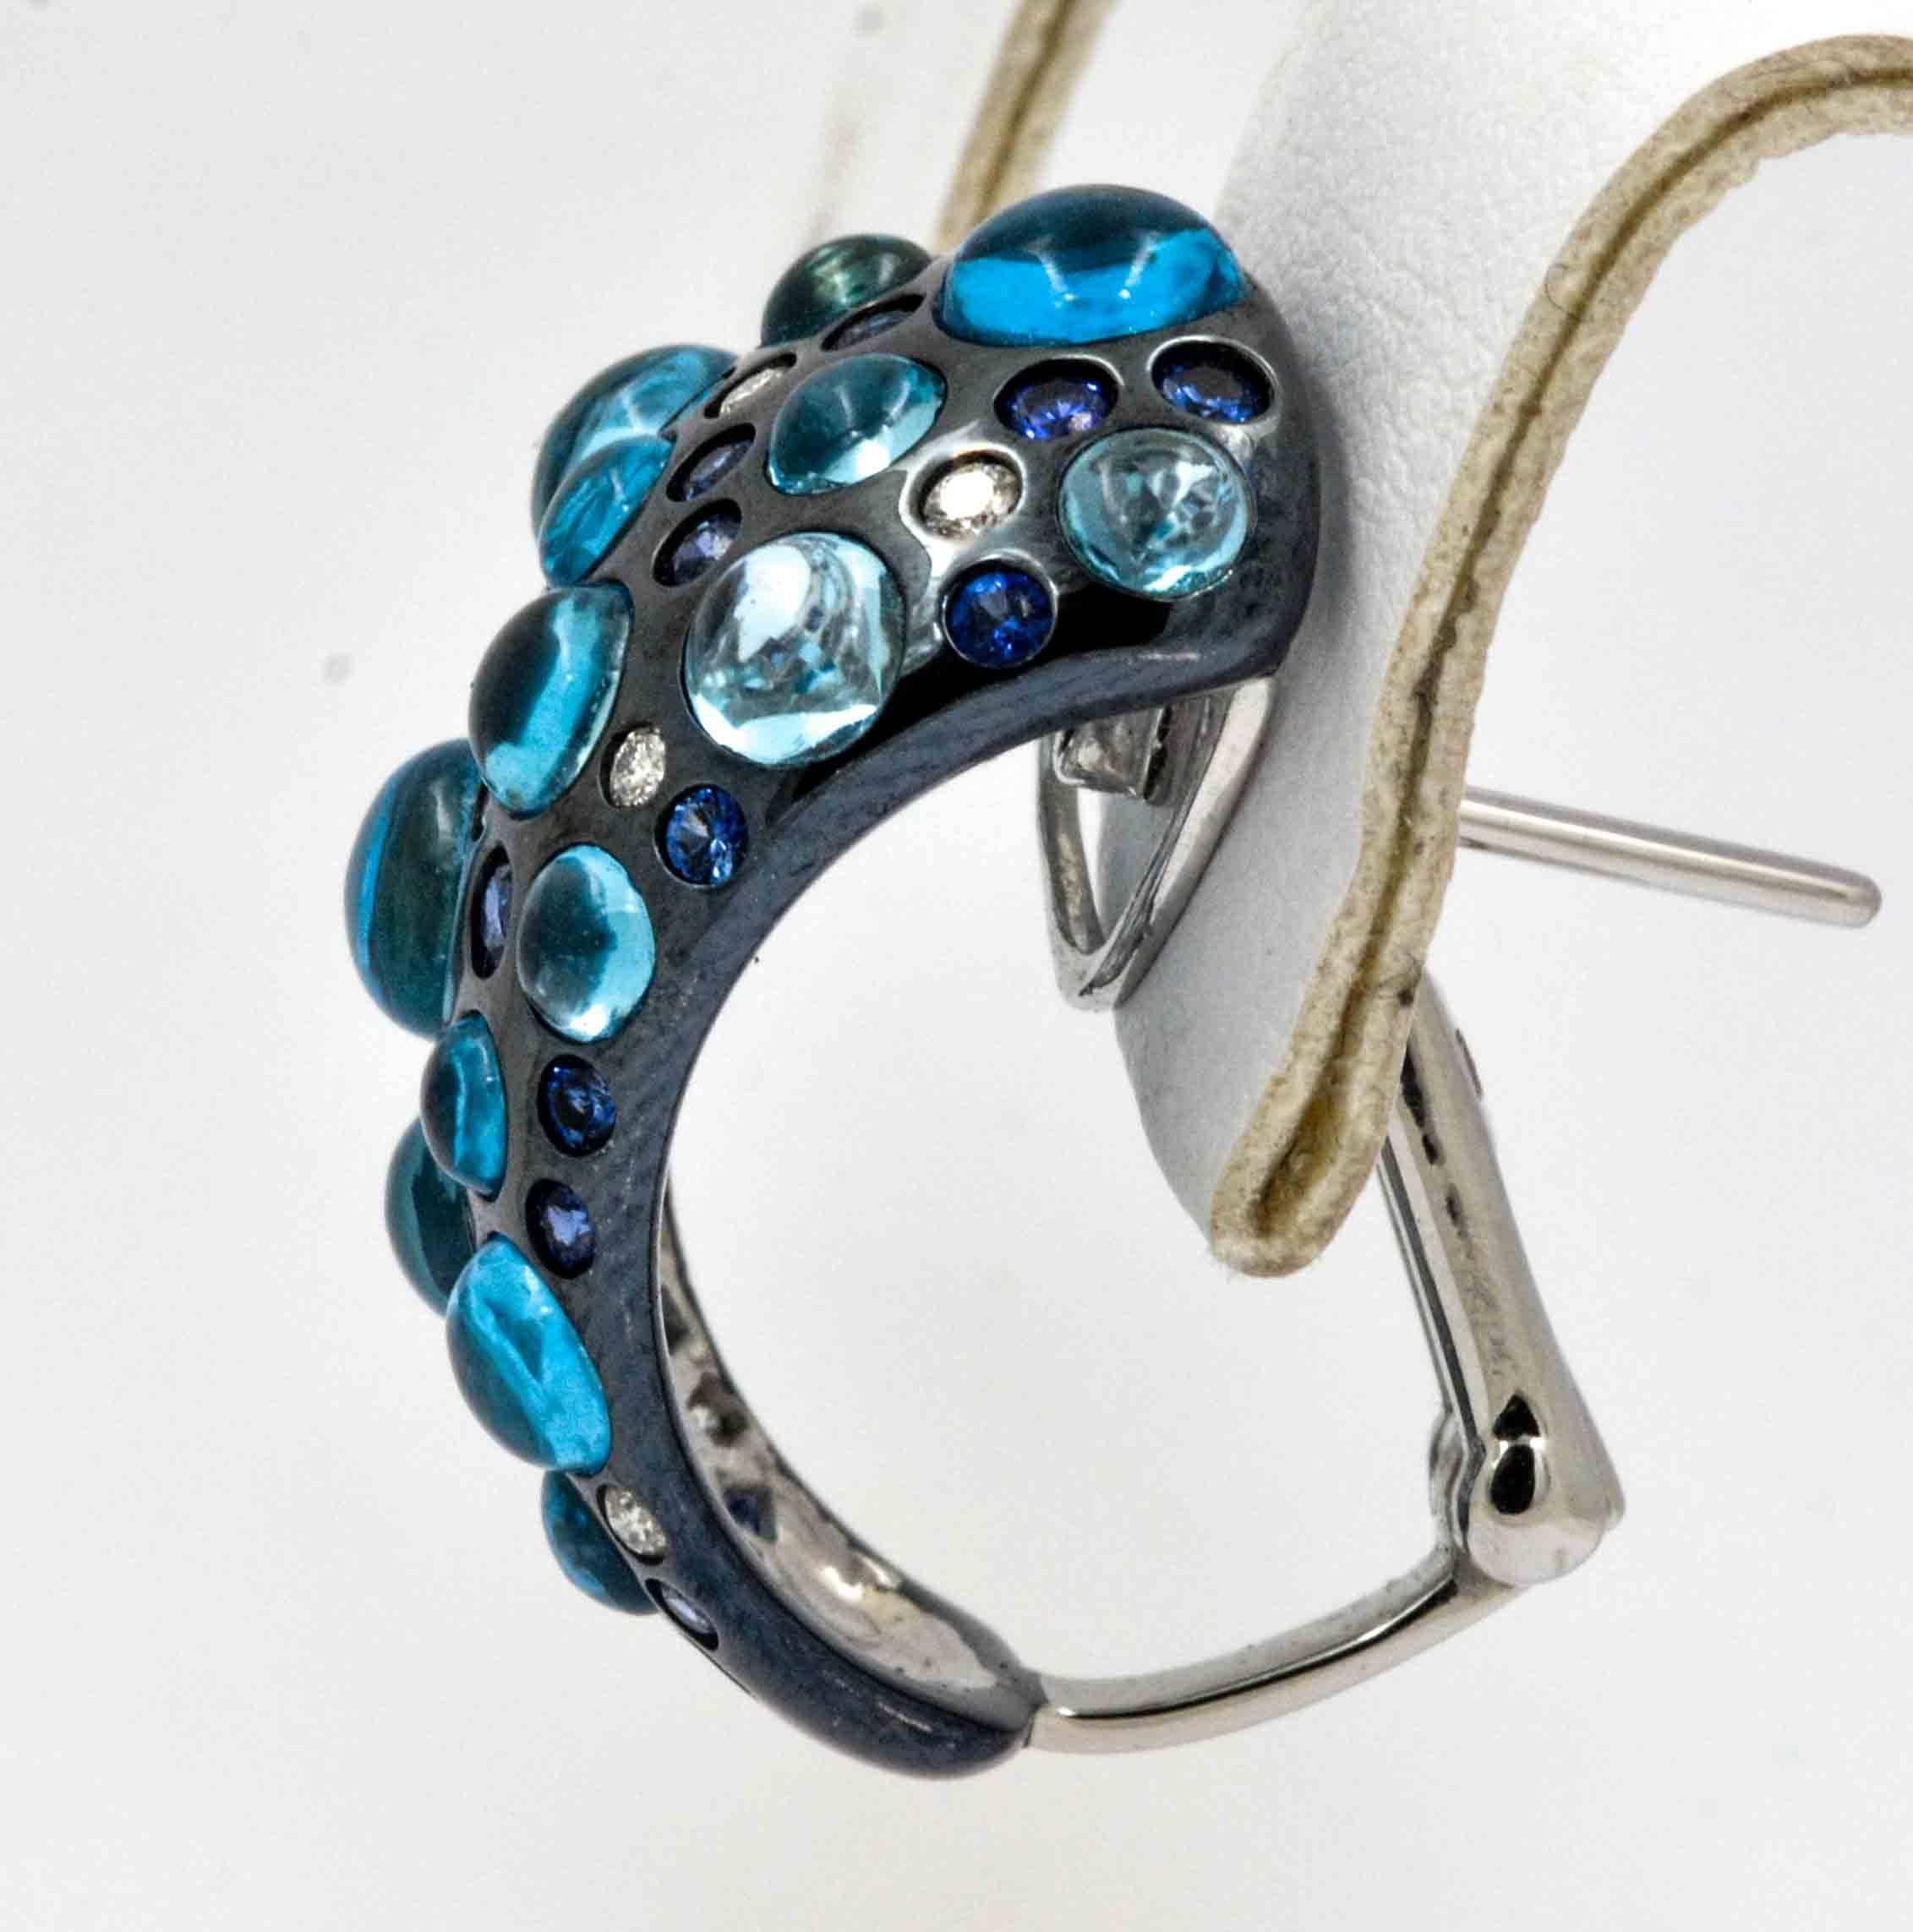 It's all about the dazzle in these Rodney Rayner 18 karat white gold and gleaming black rhodium contrasting majestically in these unique half-hoop earrings. With appealing round, cabochon-cut blue topaz (12.56 carats), tantalizing round